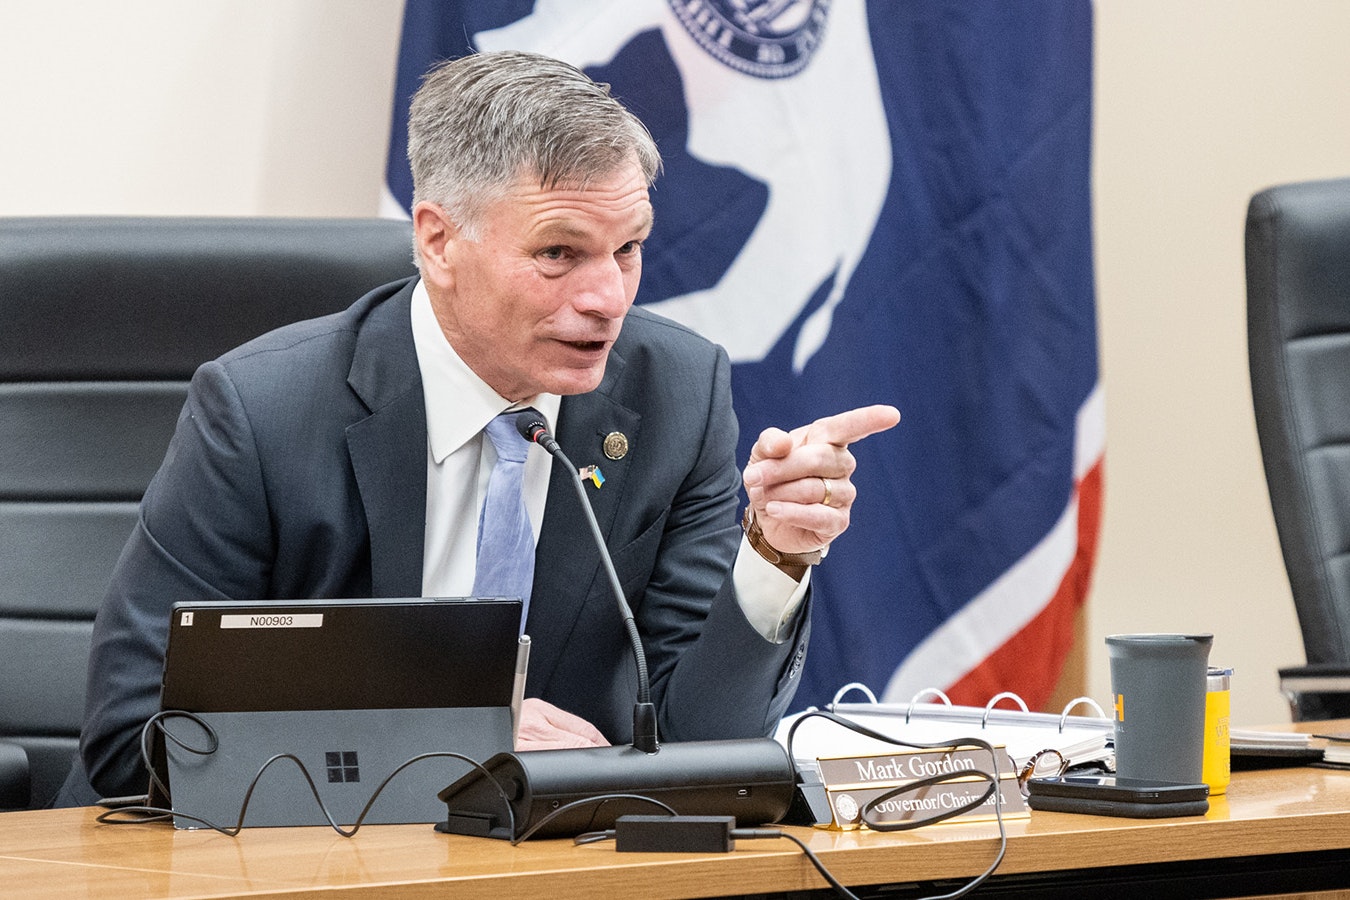 Despite Gov. Mark Gordon pushing for at $46 million trust to permanently fund Wyoming's 988 suicide call centers, lawmakers gutted the funding during their recent session. Gordon doubled down on pushing for mental health support Tuesday during his Governor's Mental Health Summit.